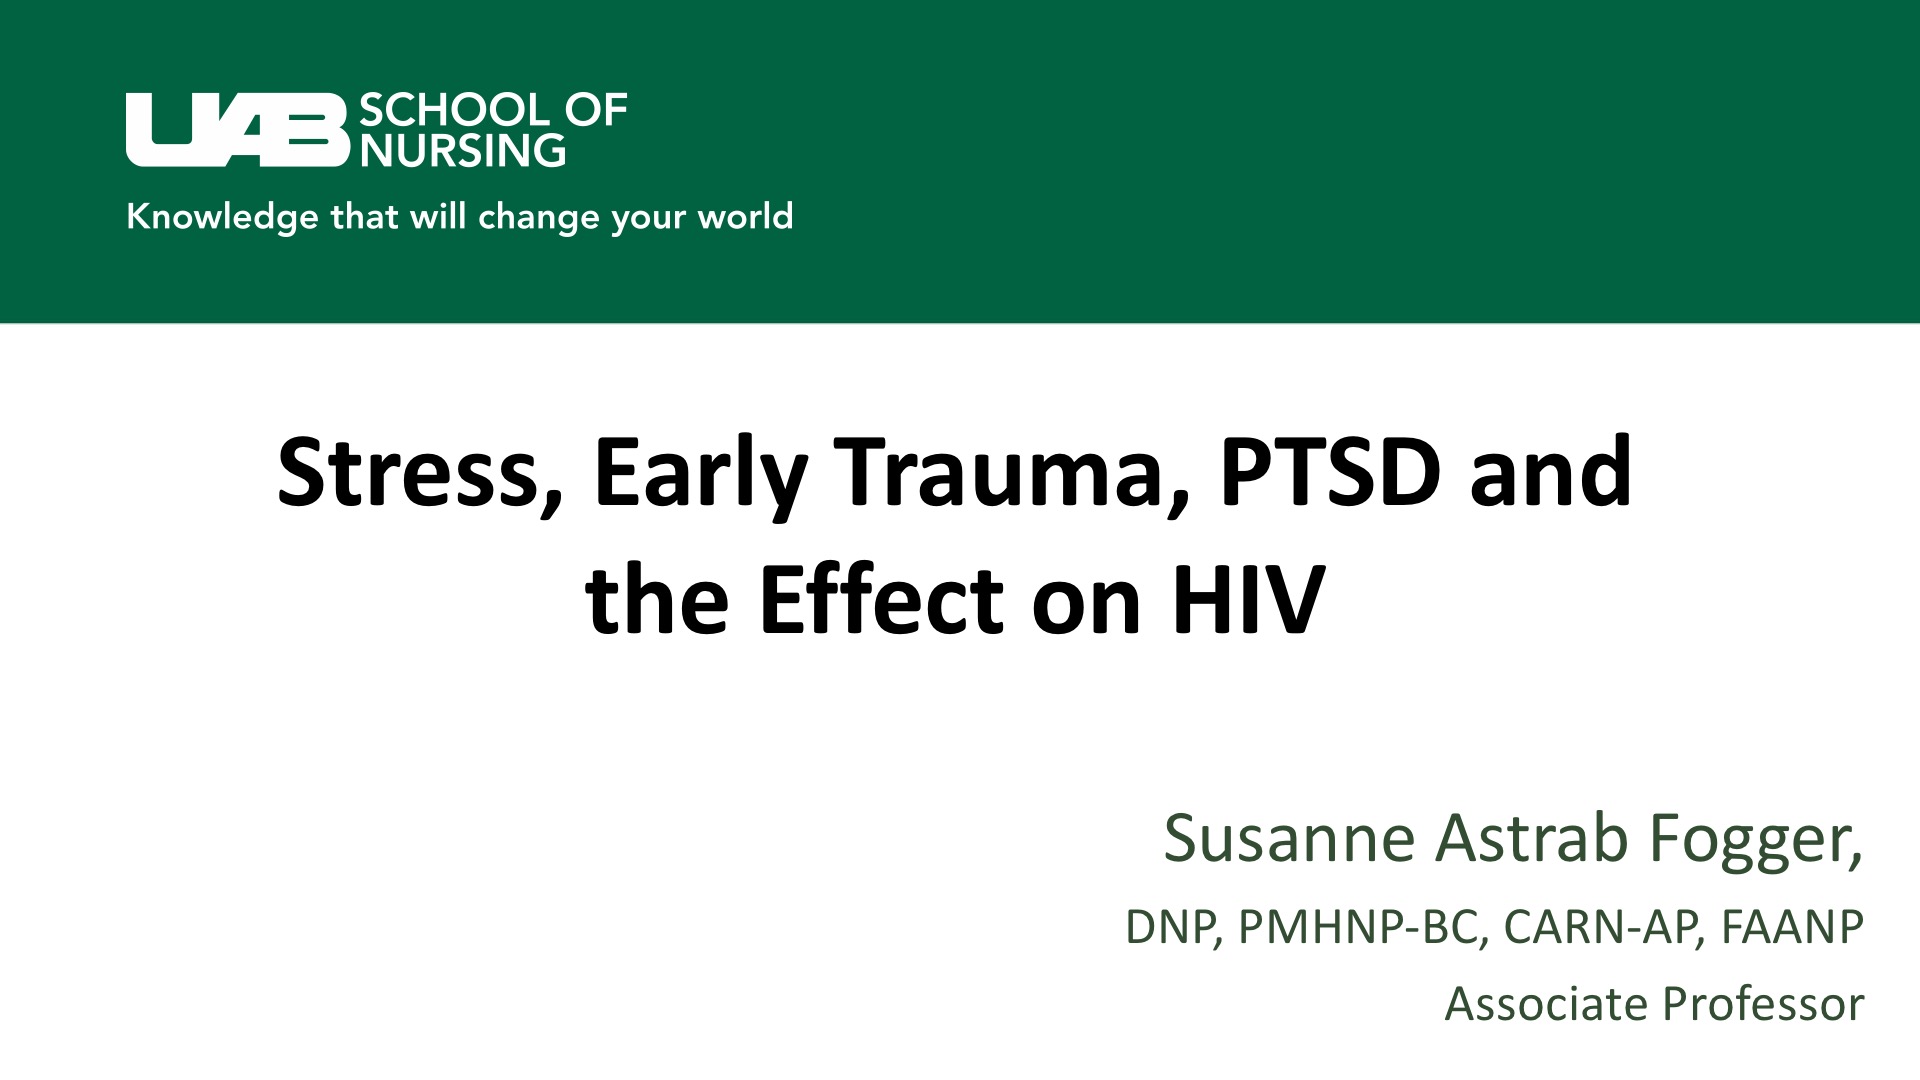 Stress, Early Trauma, PTSD and the Effect on HIV